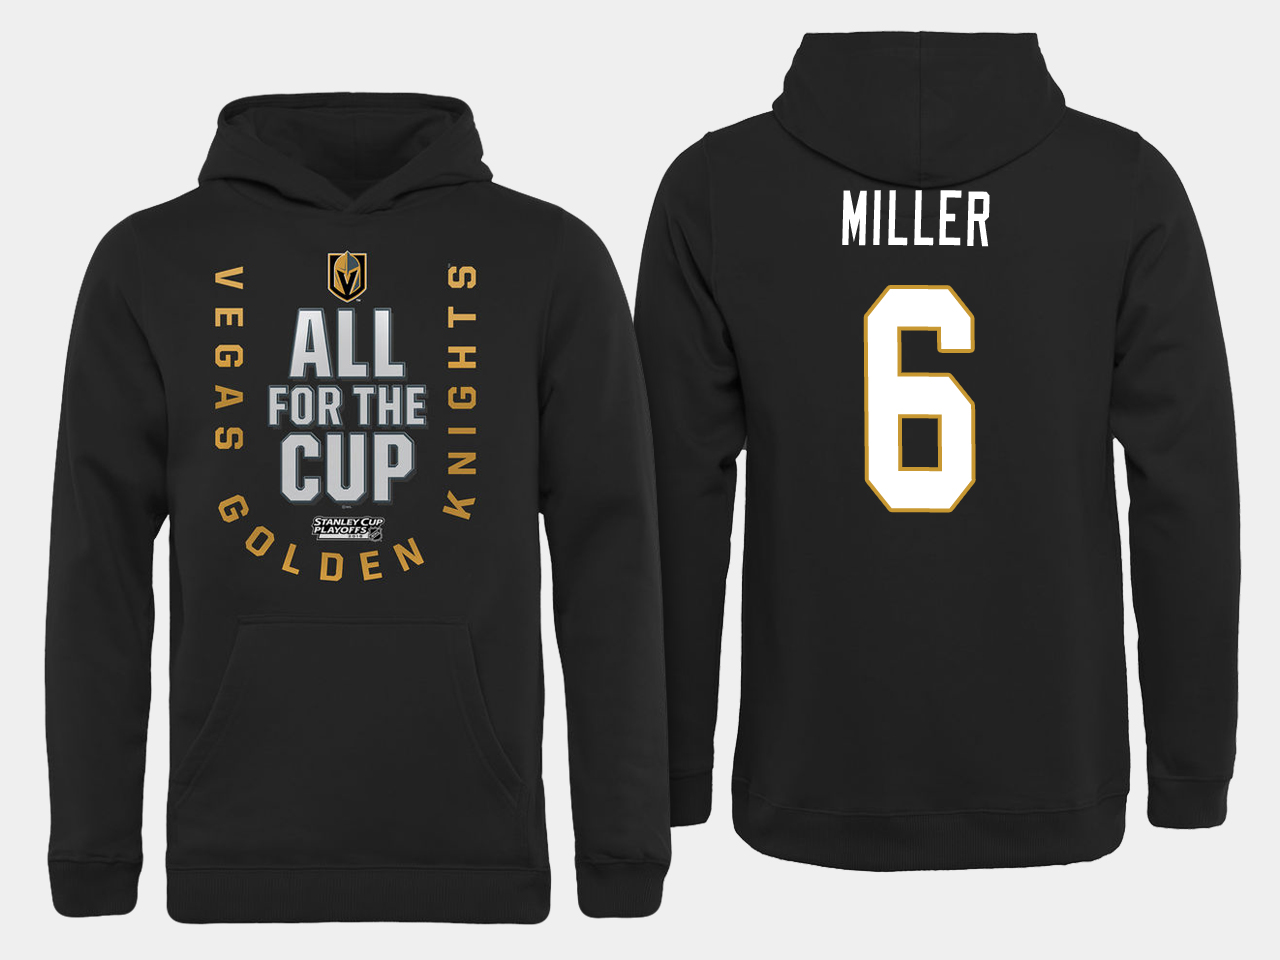 Men NHL Vegas Golden Knights 6 Miller All for the Cup hoodie